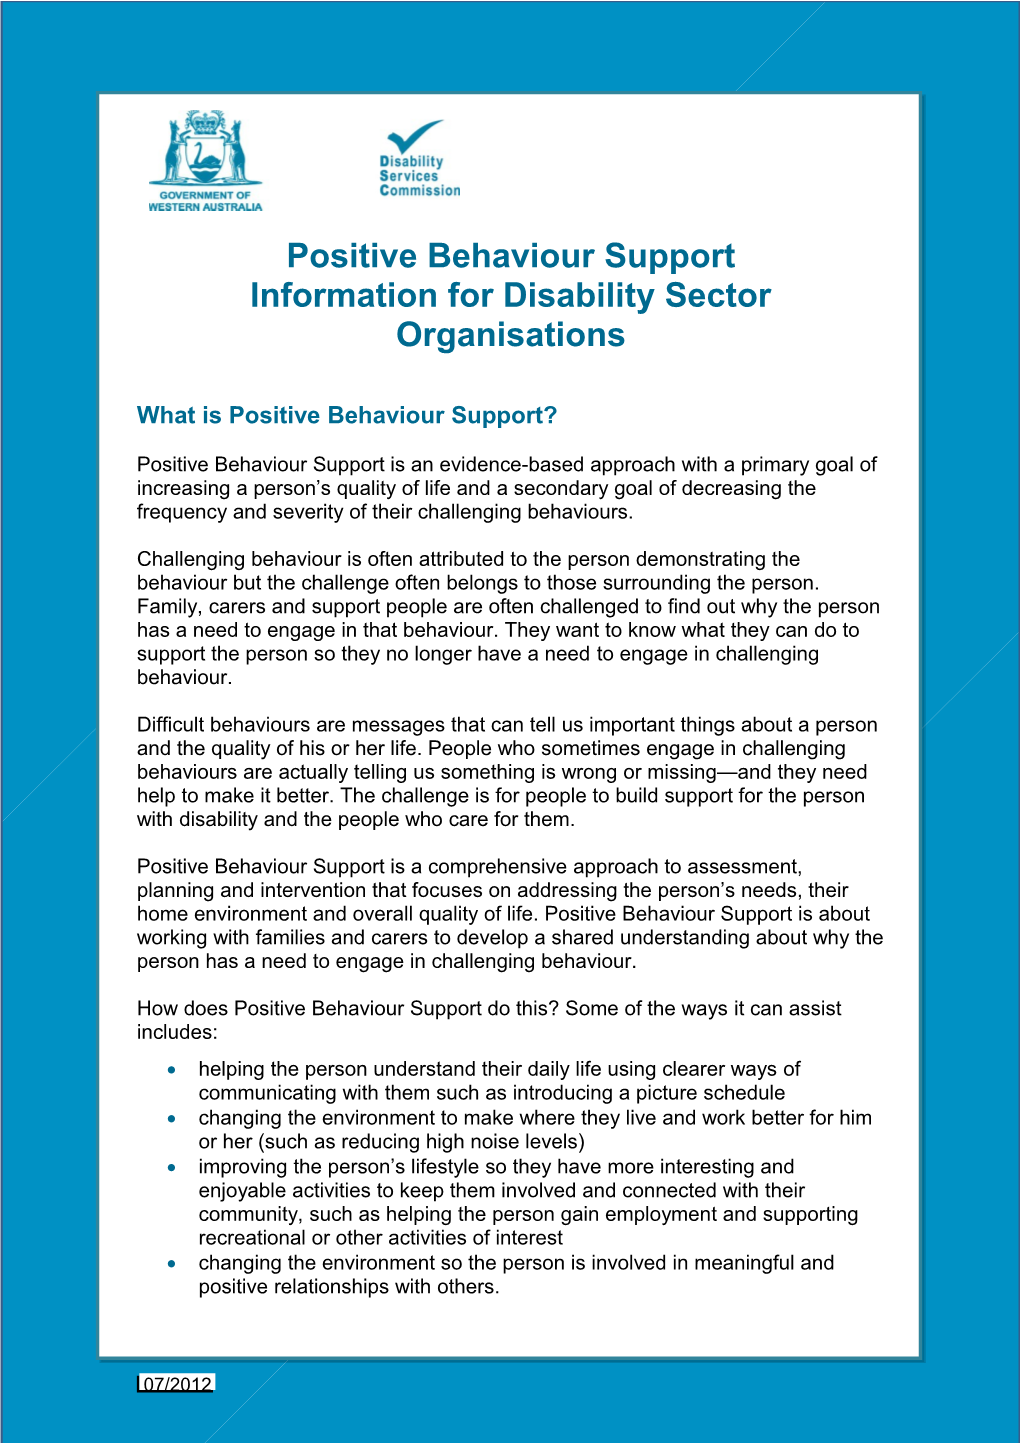 Positive Behaviour Support Information for Disability Sector Organisations